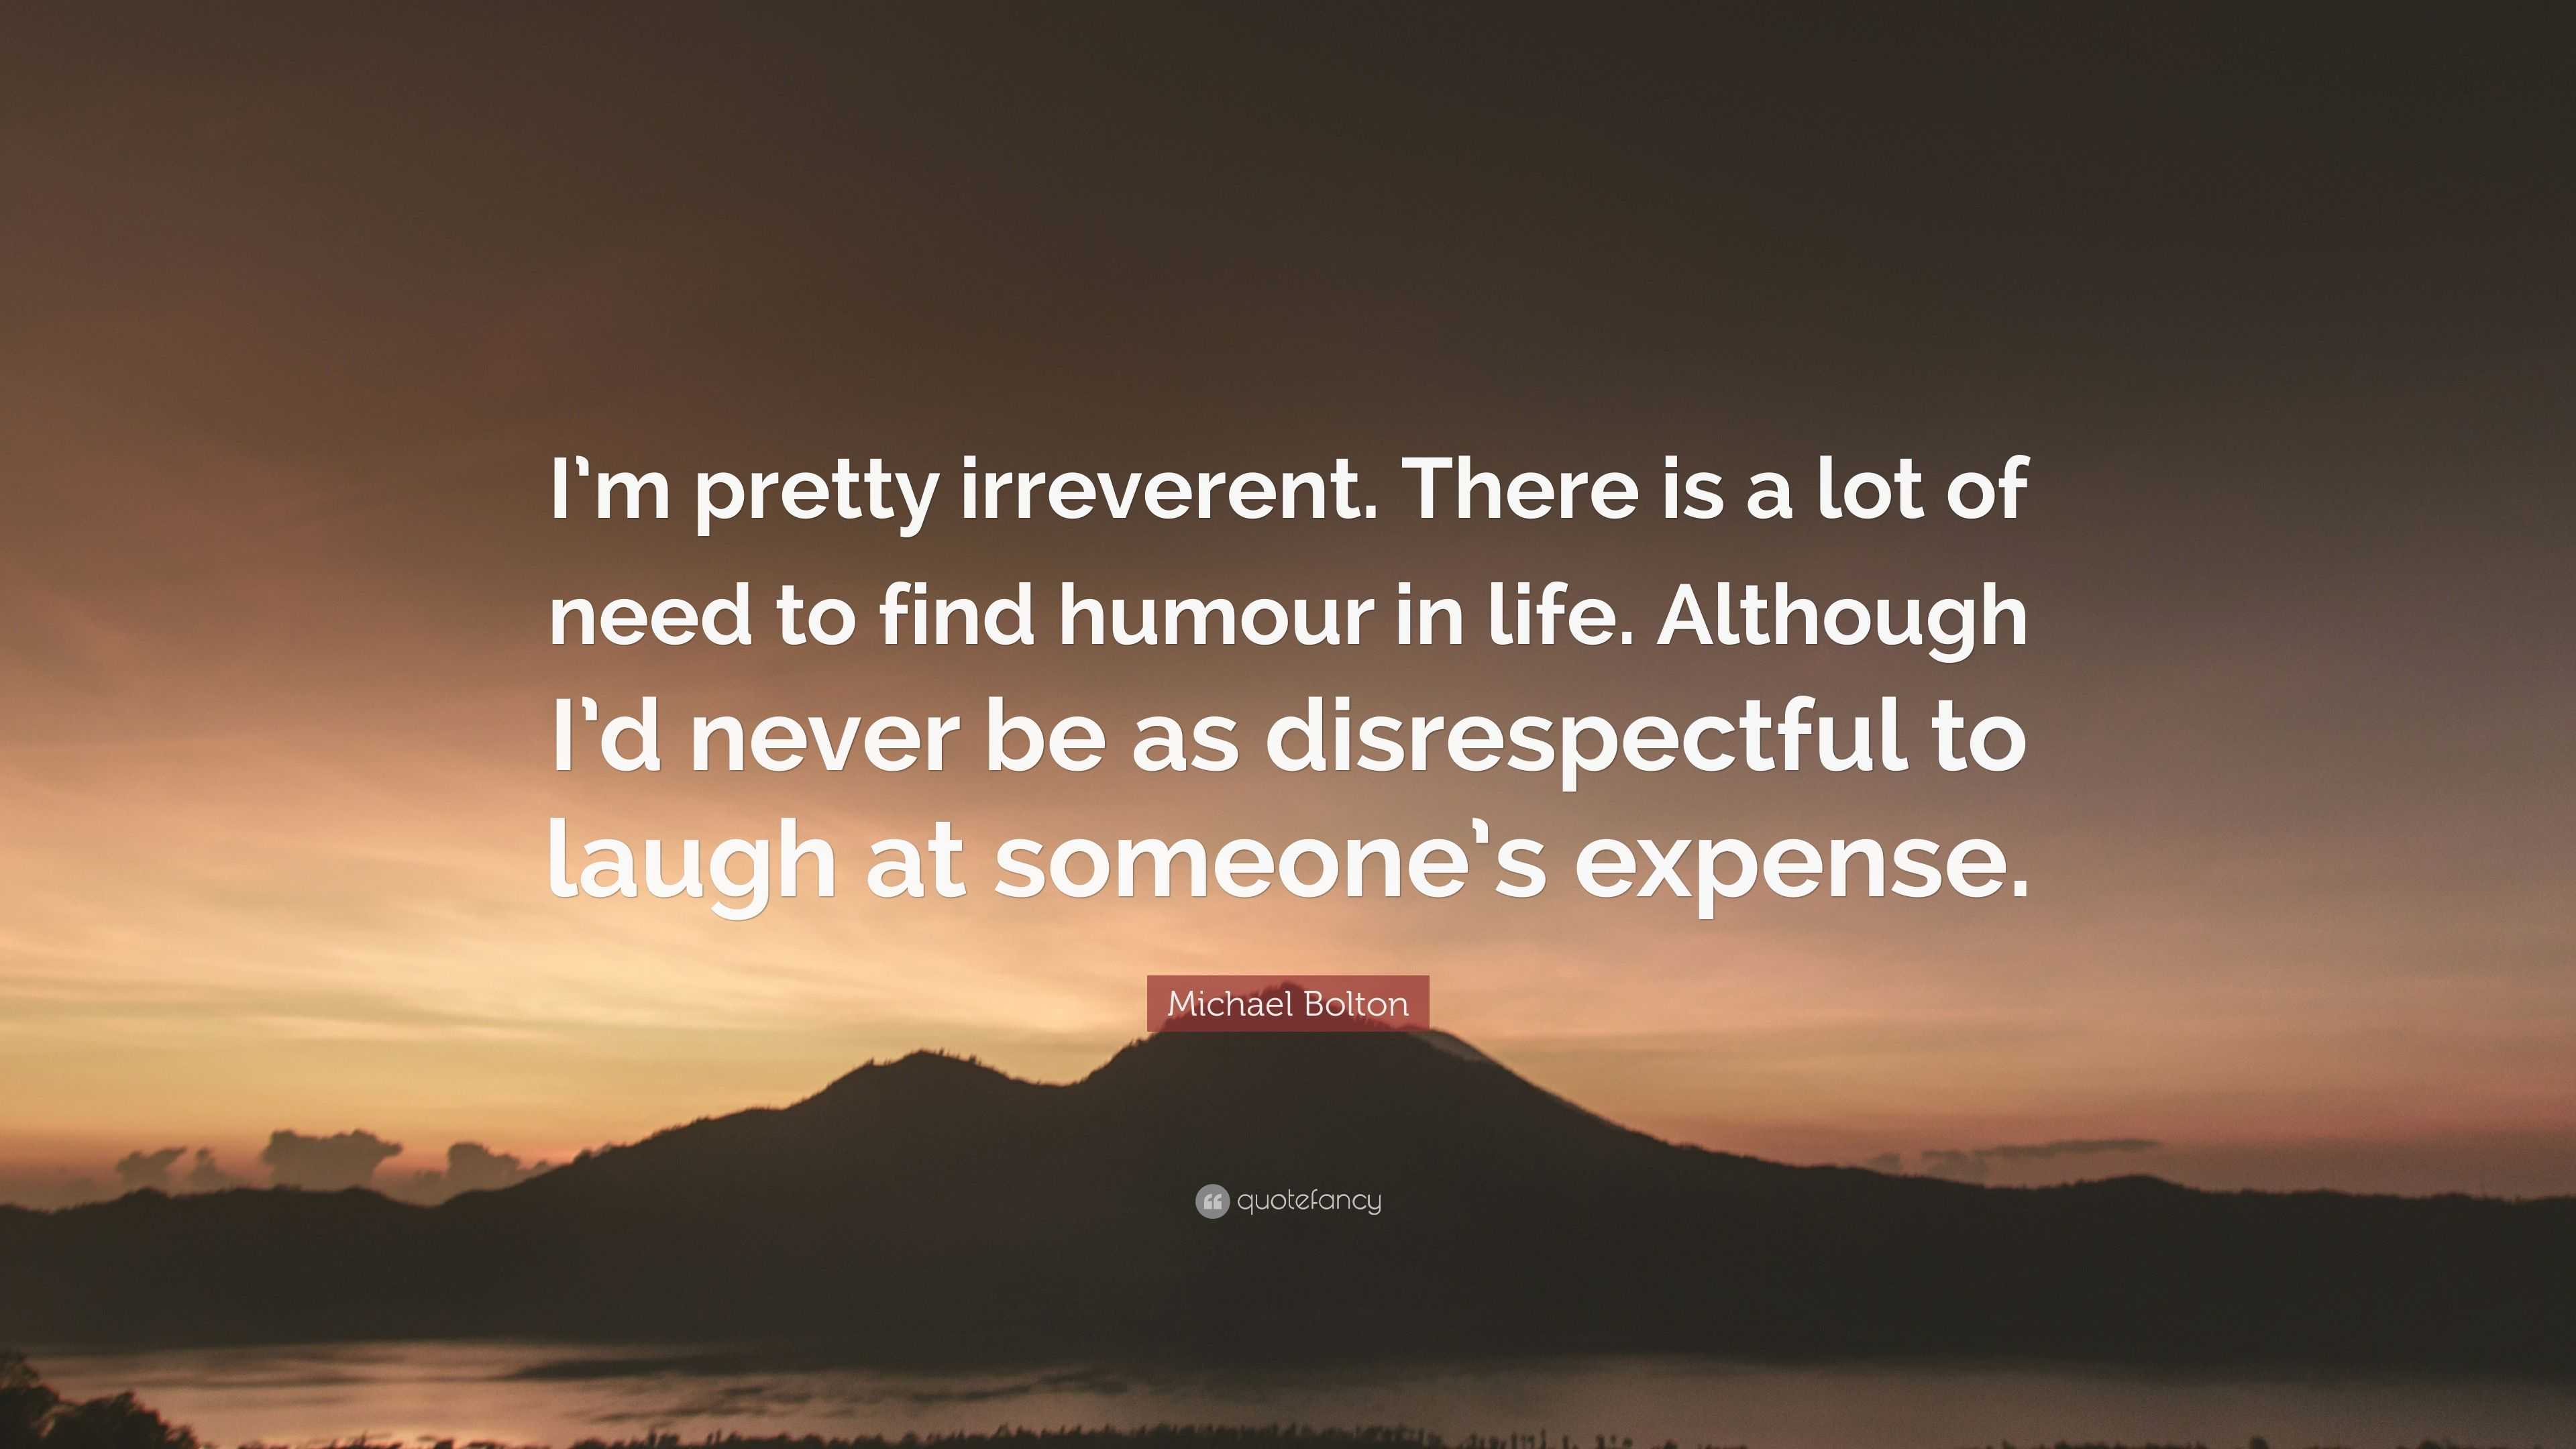 Michael Bolton Quote: “I’m pretty irreverent. There is a lot of need to ...